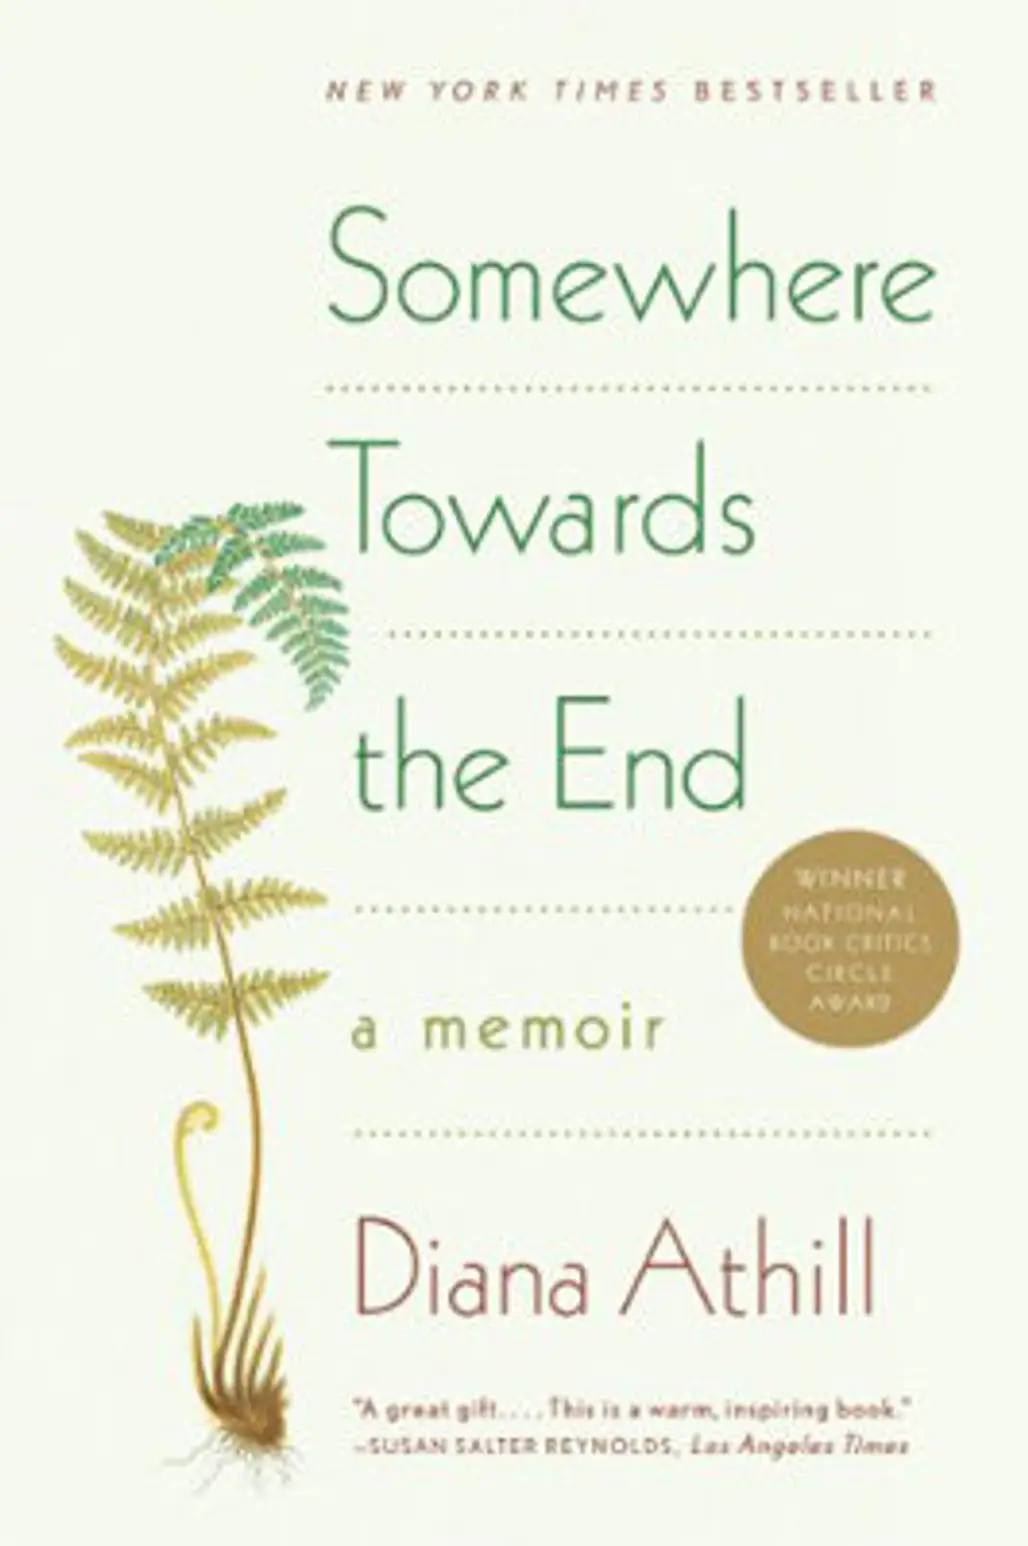 Diana Athill ‘Somewhere towards the End’